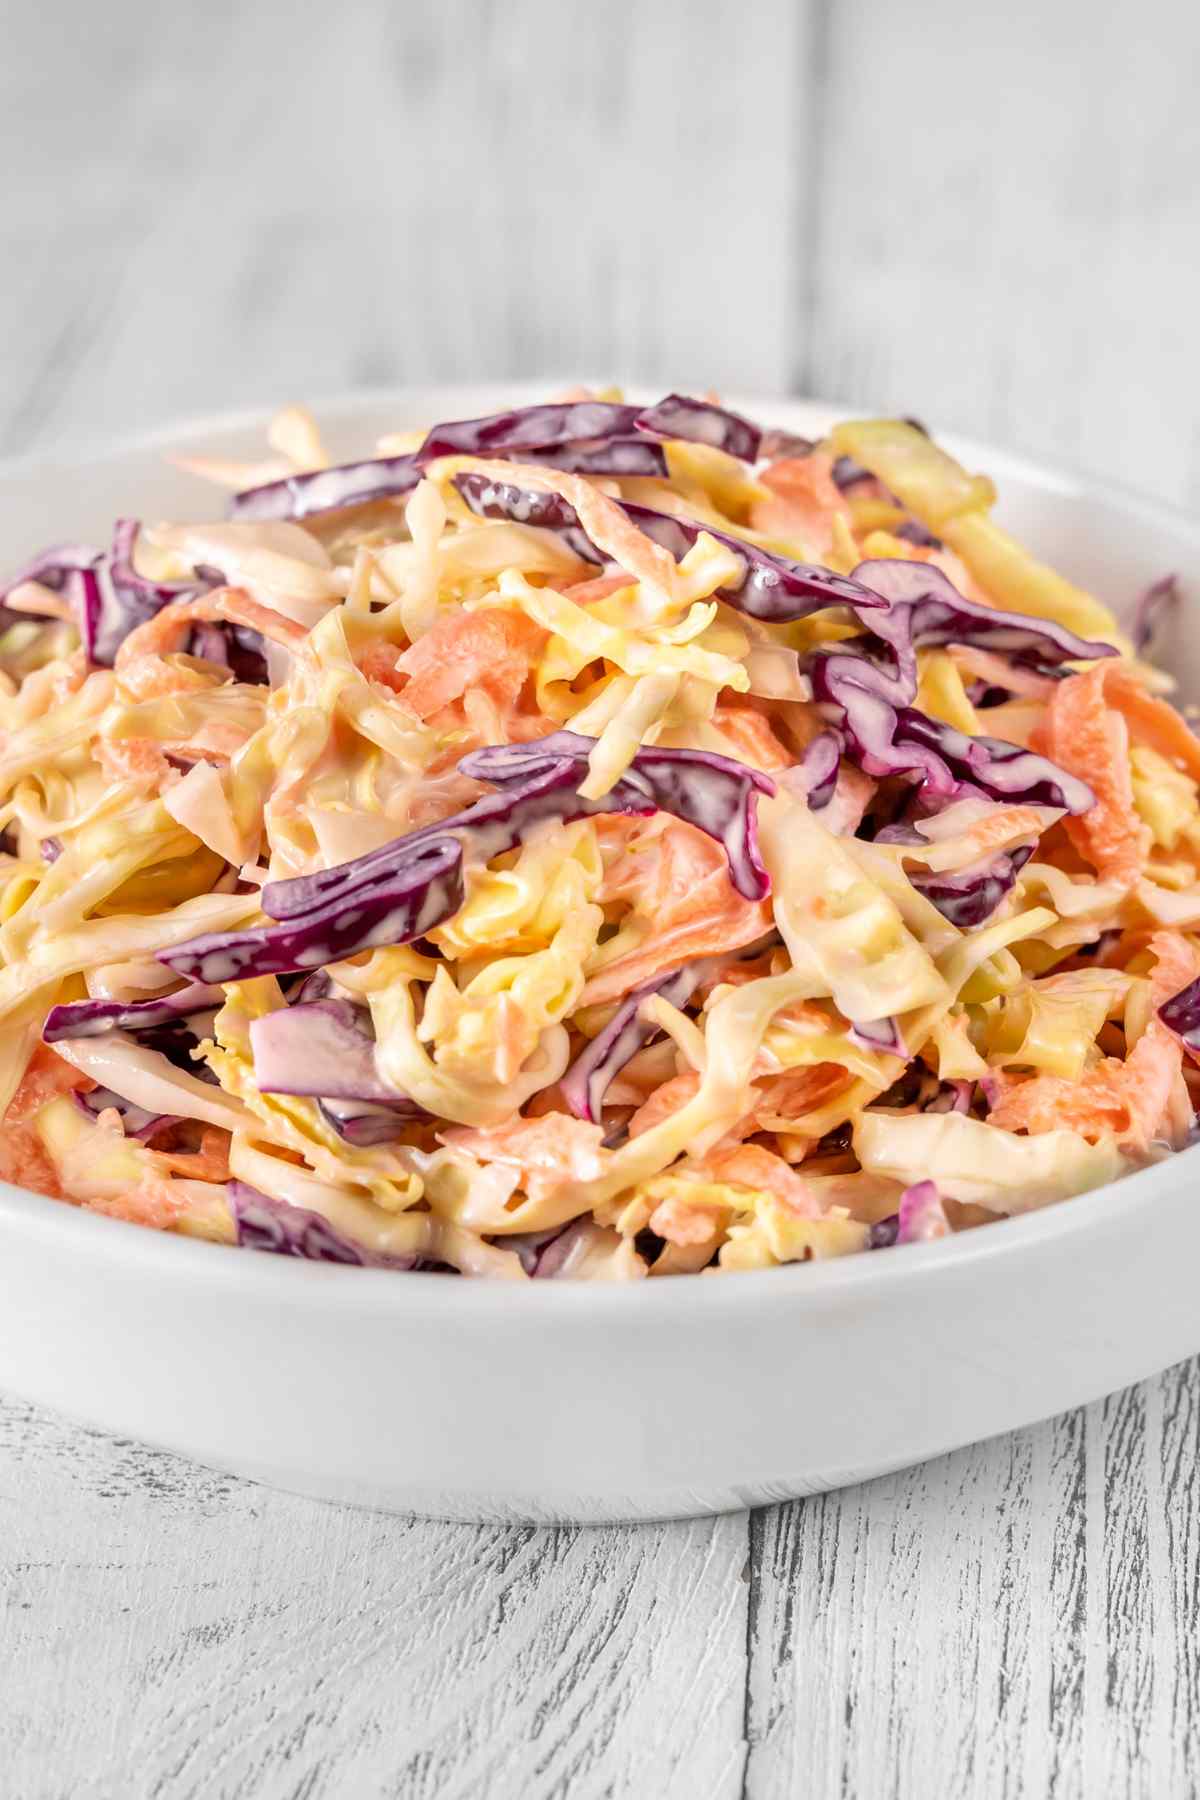 This is the perfect summer BBQ side dish you’ll love to bring along or serve. With a taste of the south, this creamy coleslaw is quick and easy to prepare and makes the perfect accompaniment to any barbecue meal.